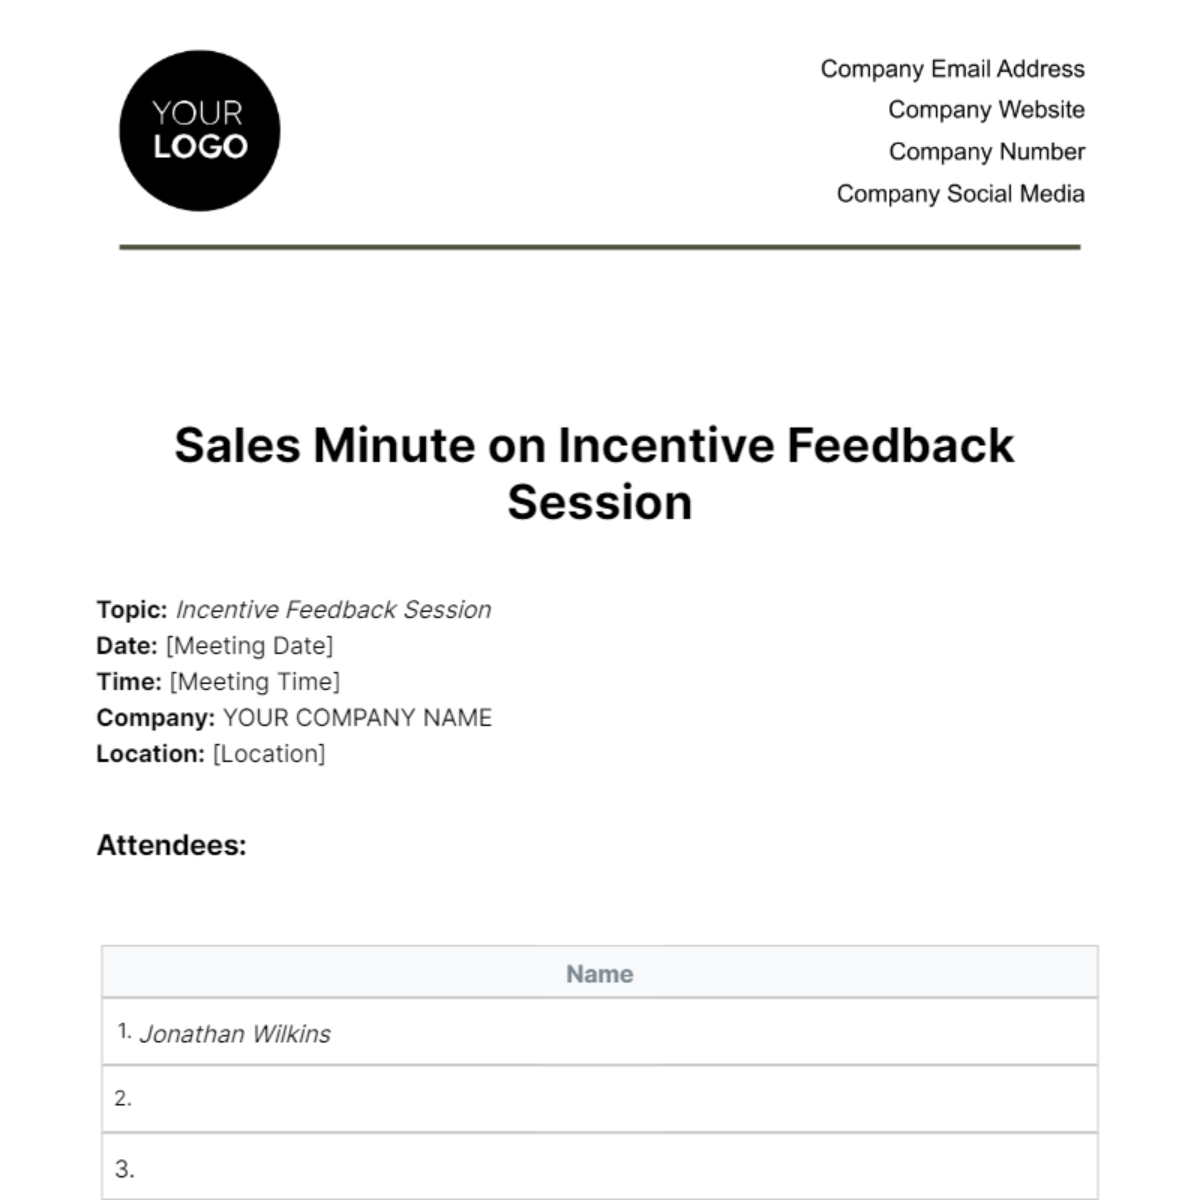 Sales Minute on Incentive Feedback Session Template